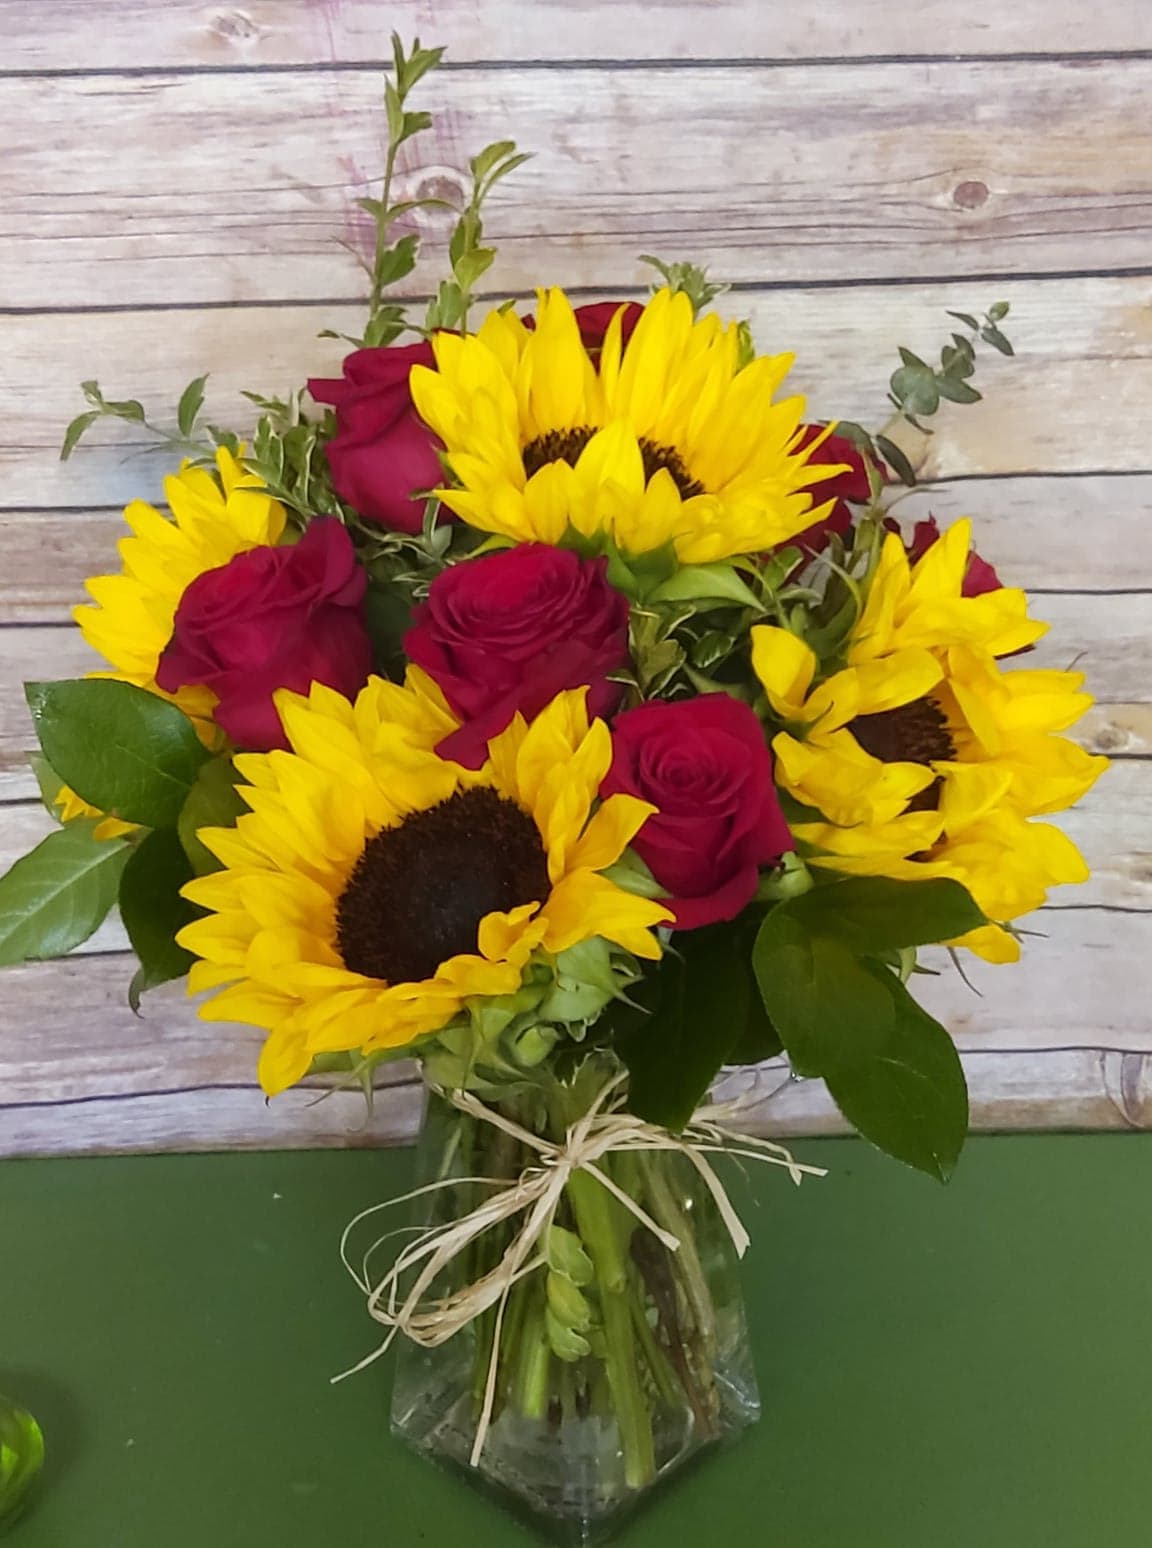 Sunflowers in Love - Red roses mean love and romance. Introduce the enamored red rose to the bright and ever vibrantly eye catching sunflower and fiery magic happens in a curvy old fashioned vase. This is for that burning love.